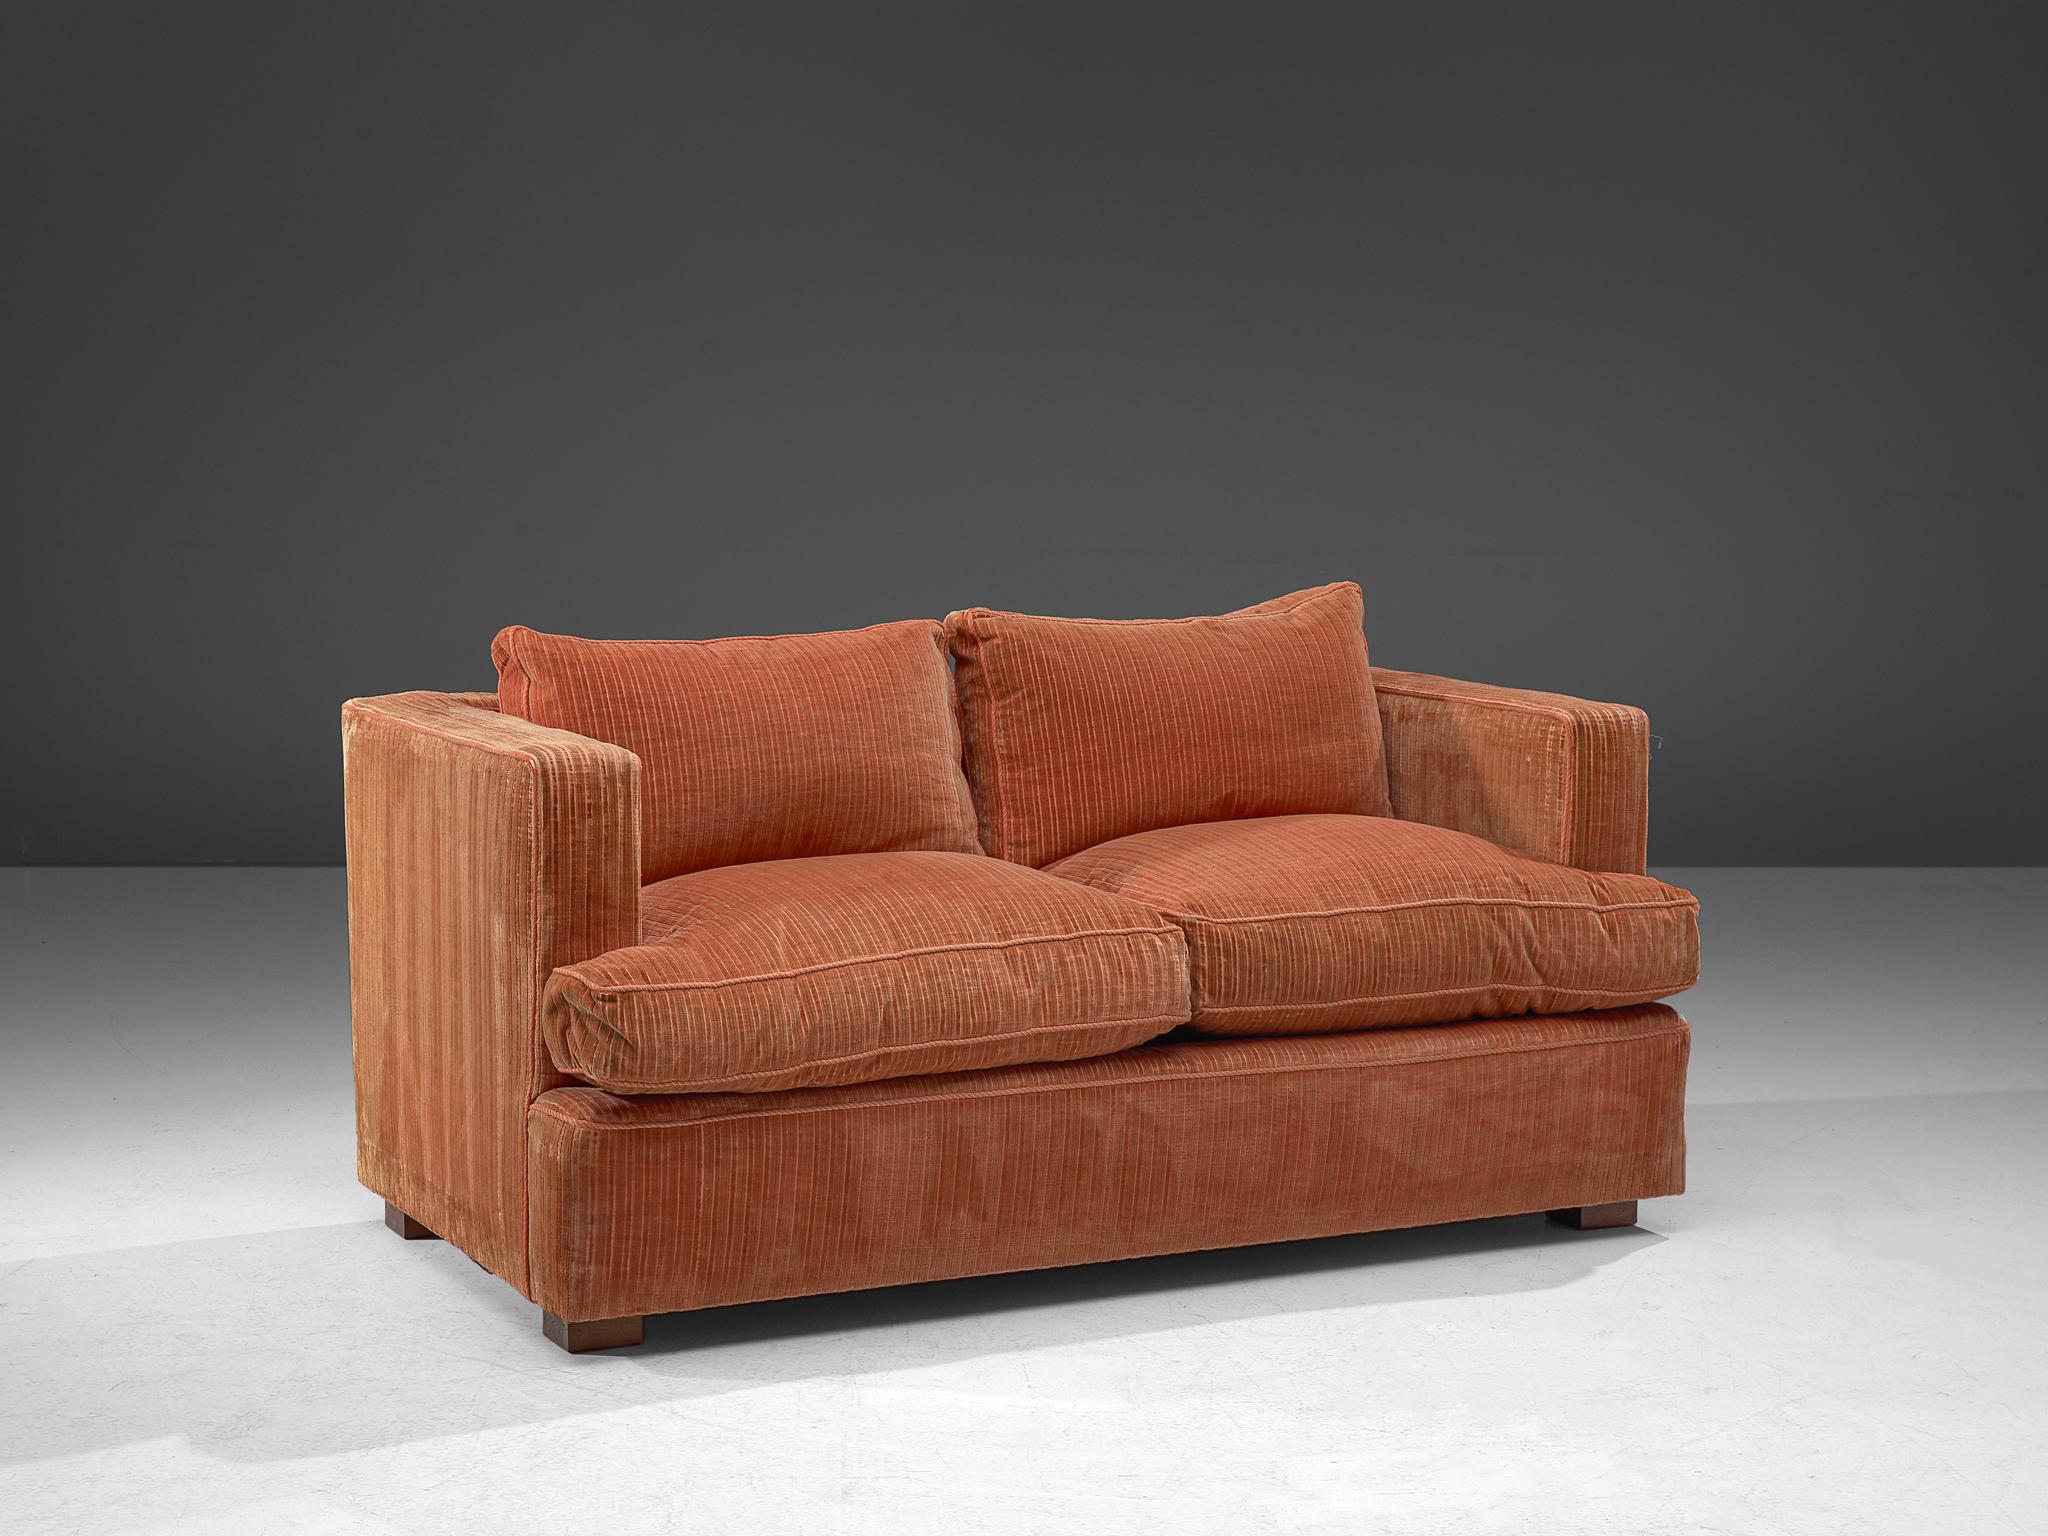 Sofa, corduroy velvet, wood, Italy, 1970s

This delicate sofa has a cozy and bulky appeal. An orange to peach velvet has been used to cover the seating. The textured surface of the fabric, consisting of vertical lines, adds a graphical touch to the